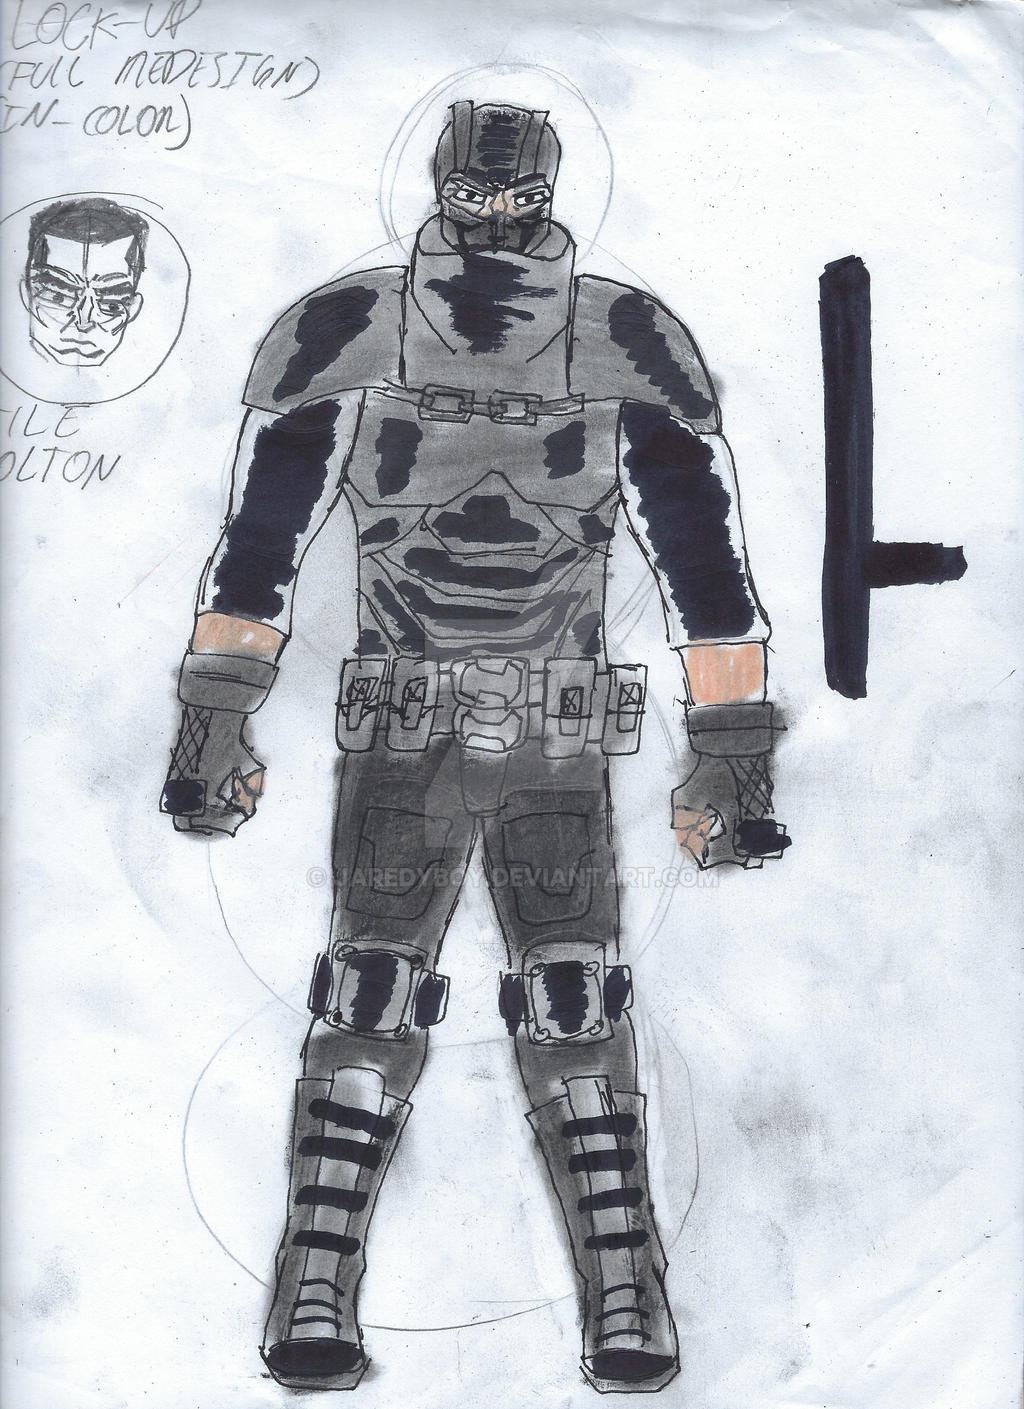 Lock Up Full DC Unlimited Redesign by jaredyboy on DeviantArt